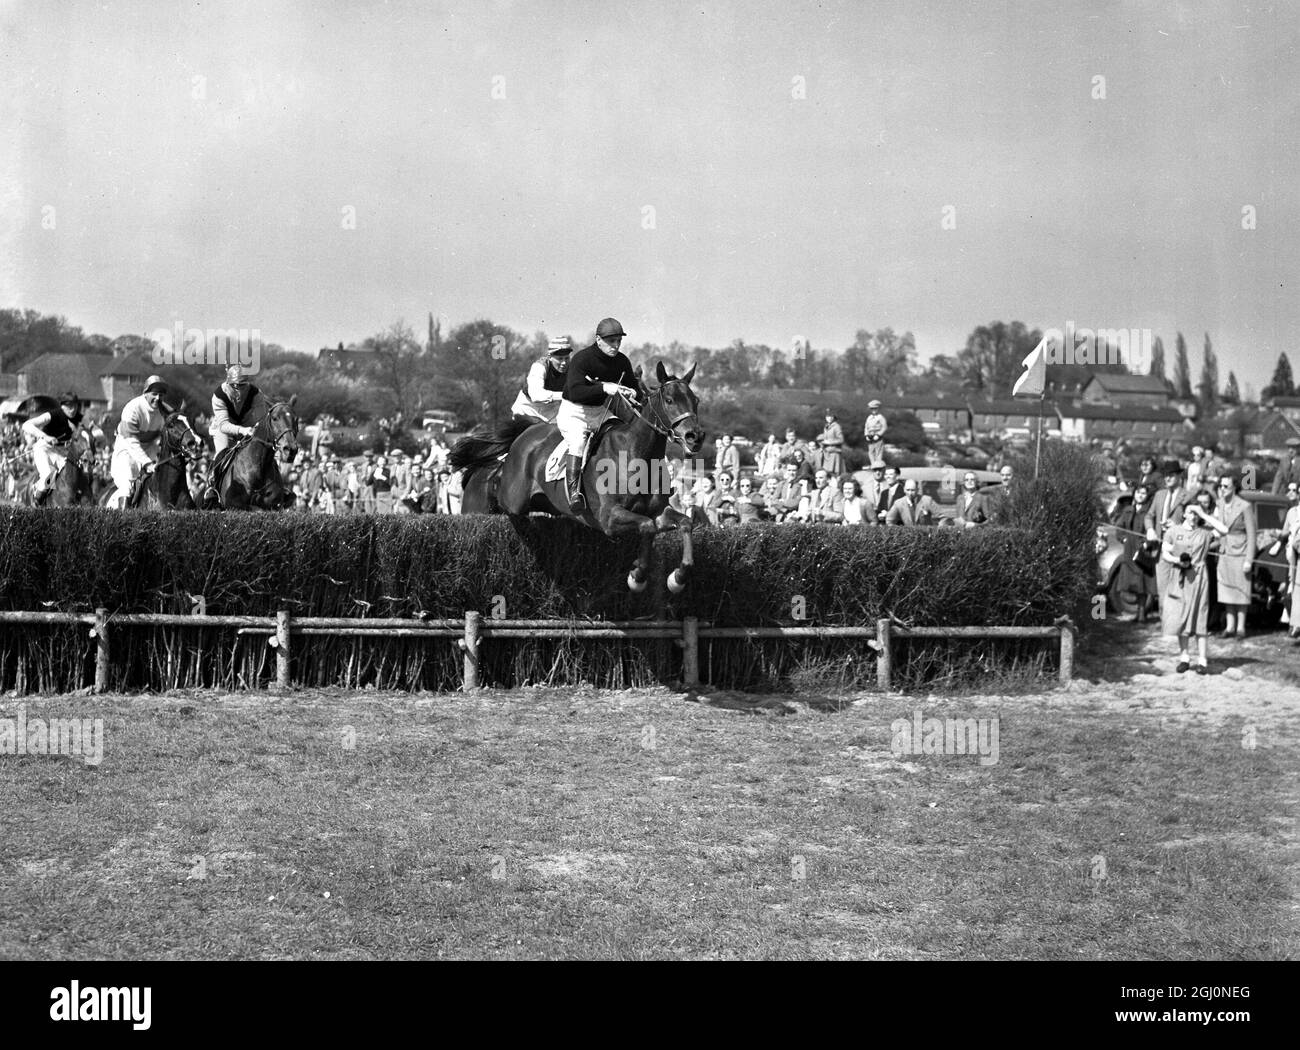 9 May 1954 Ivor Kerwood on Dark Stranger takes the last to win the Harewoods Challenge Cup (Division 1) event at the Old Surrey and Burstow Hunt point-to-point races at Spitals Cross, Edenbridge, Kent, England. Second is The Mohr ridden by T.B. Palmer and third Playboy VI ridden by Mr. P. Hicksthird. TopFoto.co.uk Stock Photo